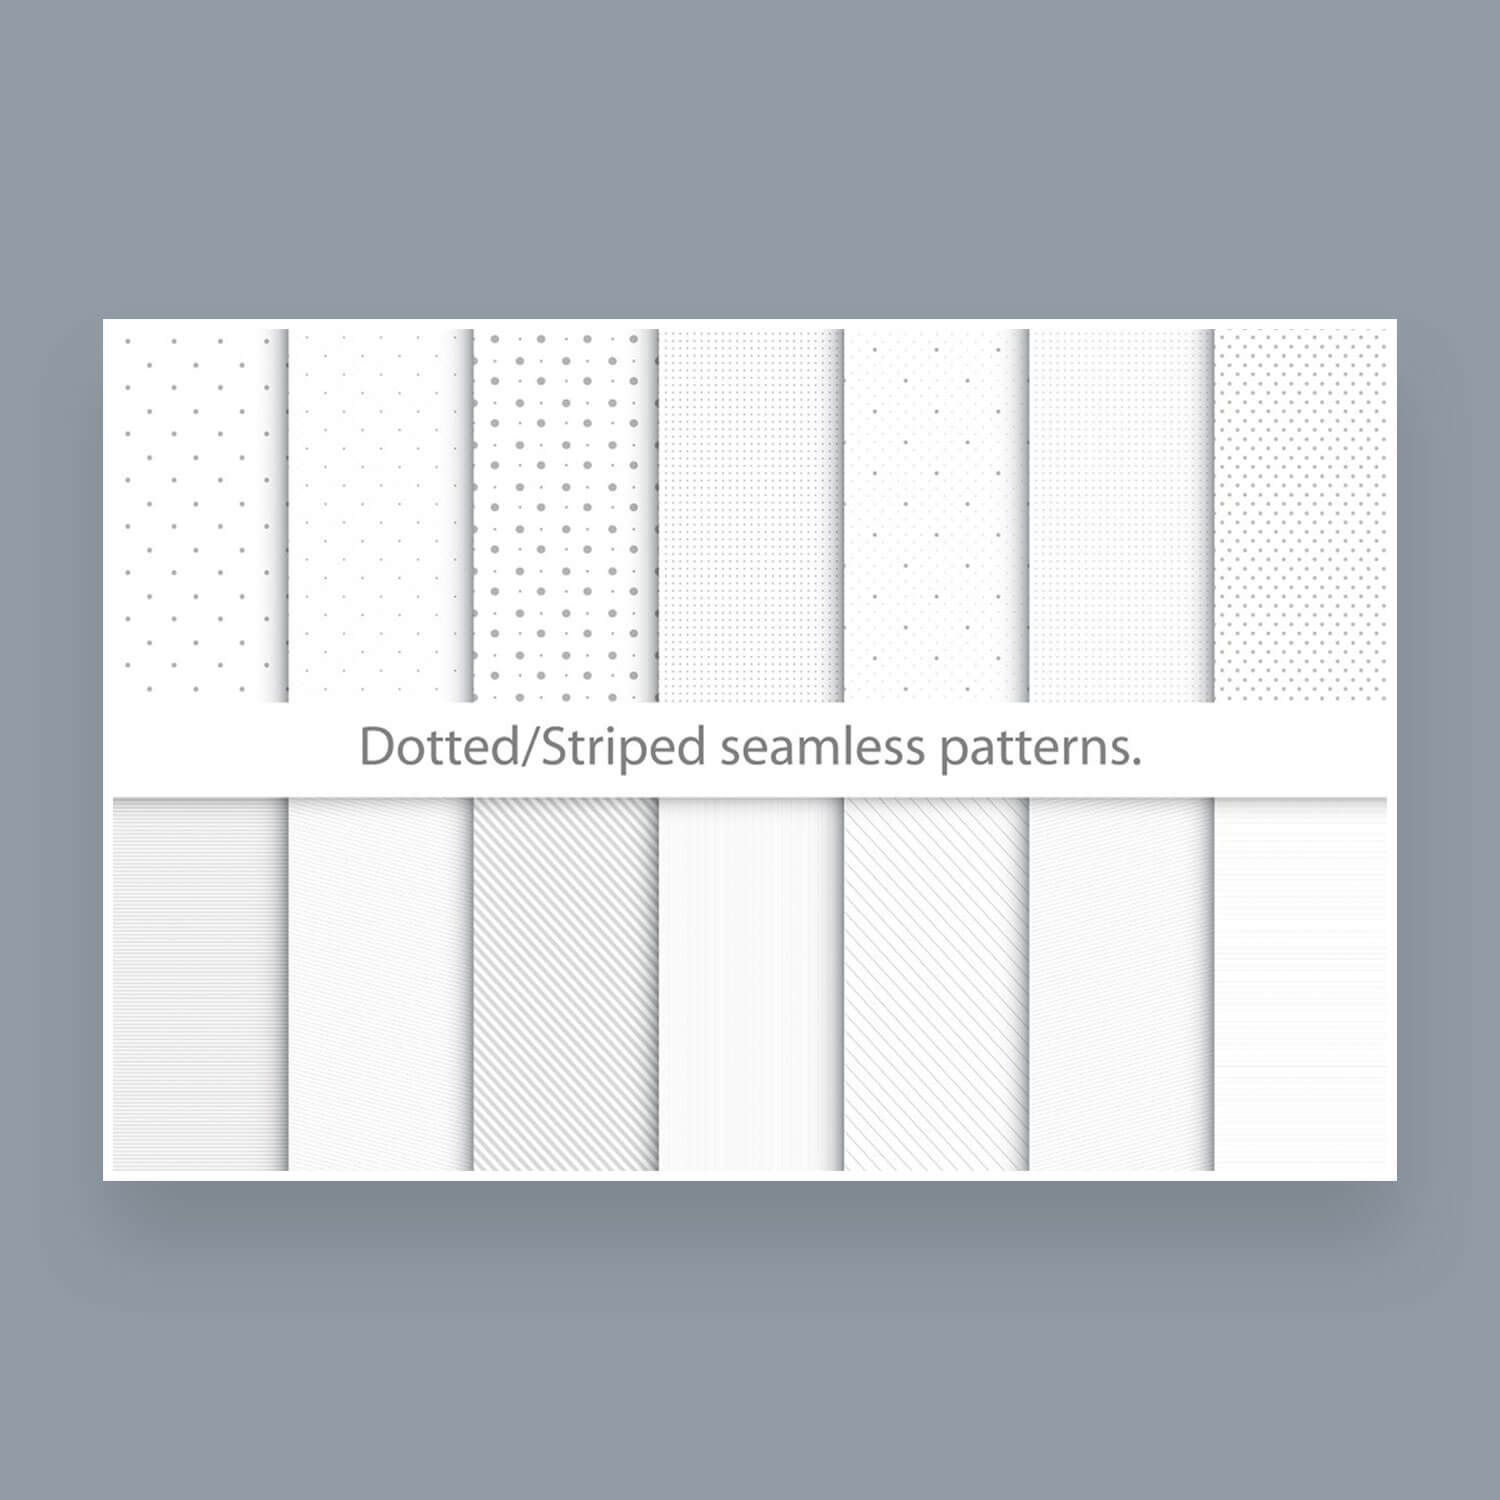 Dotted/Striped seamless patterns.